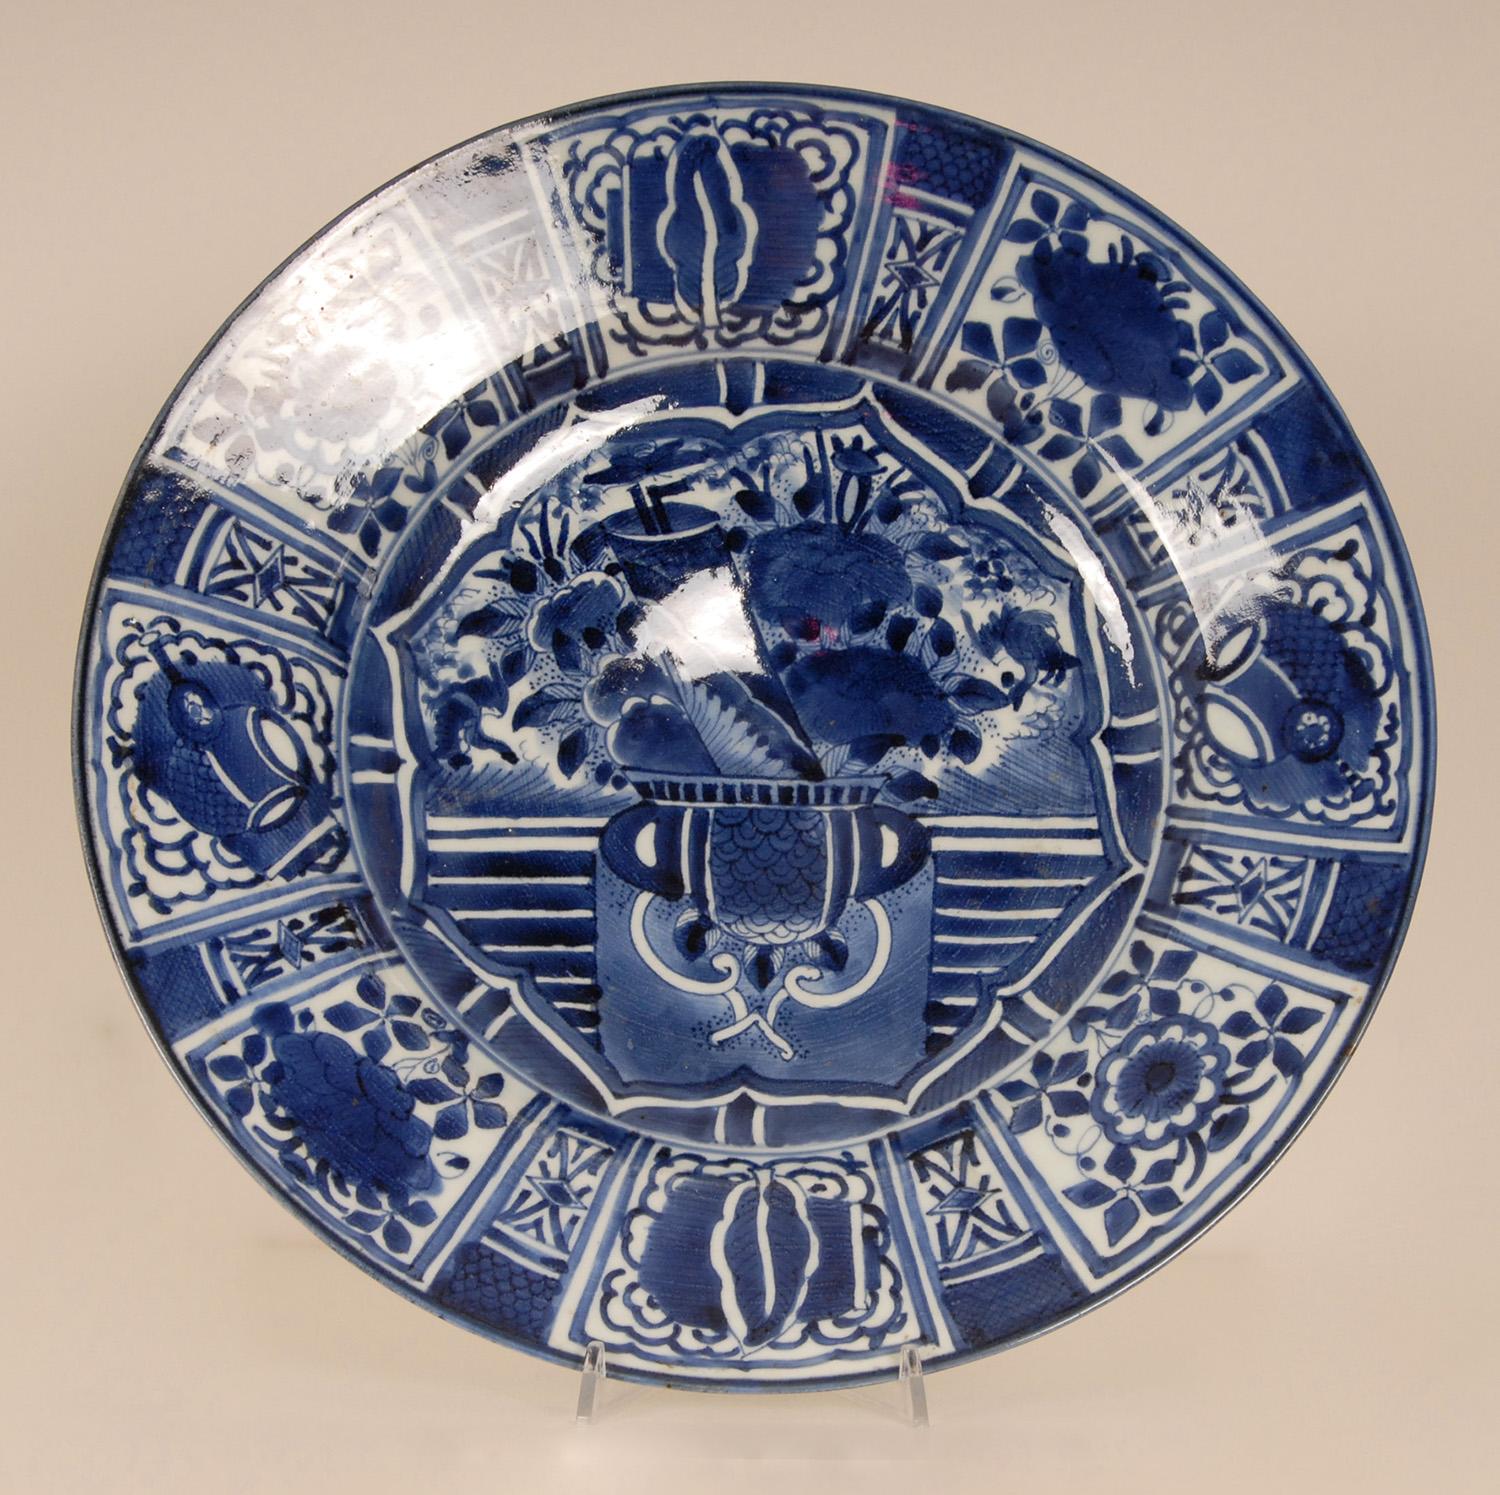 Large 17th Century Japanese Edo Period Arita dish Chinoiserie blue and white Wanli Kraak Charger
Material: Ceramic, porcelain
Design: Arita, Ming Dynasty, Wanli style, Chinoiserie
Style: Ming, William and Mary - Louis XIV Baroque, Antique, Asian